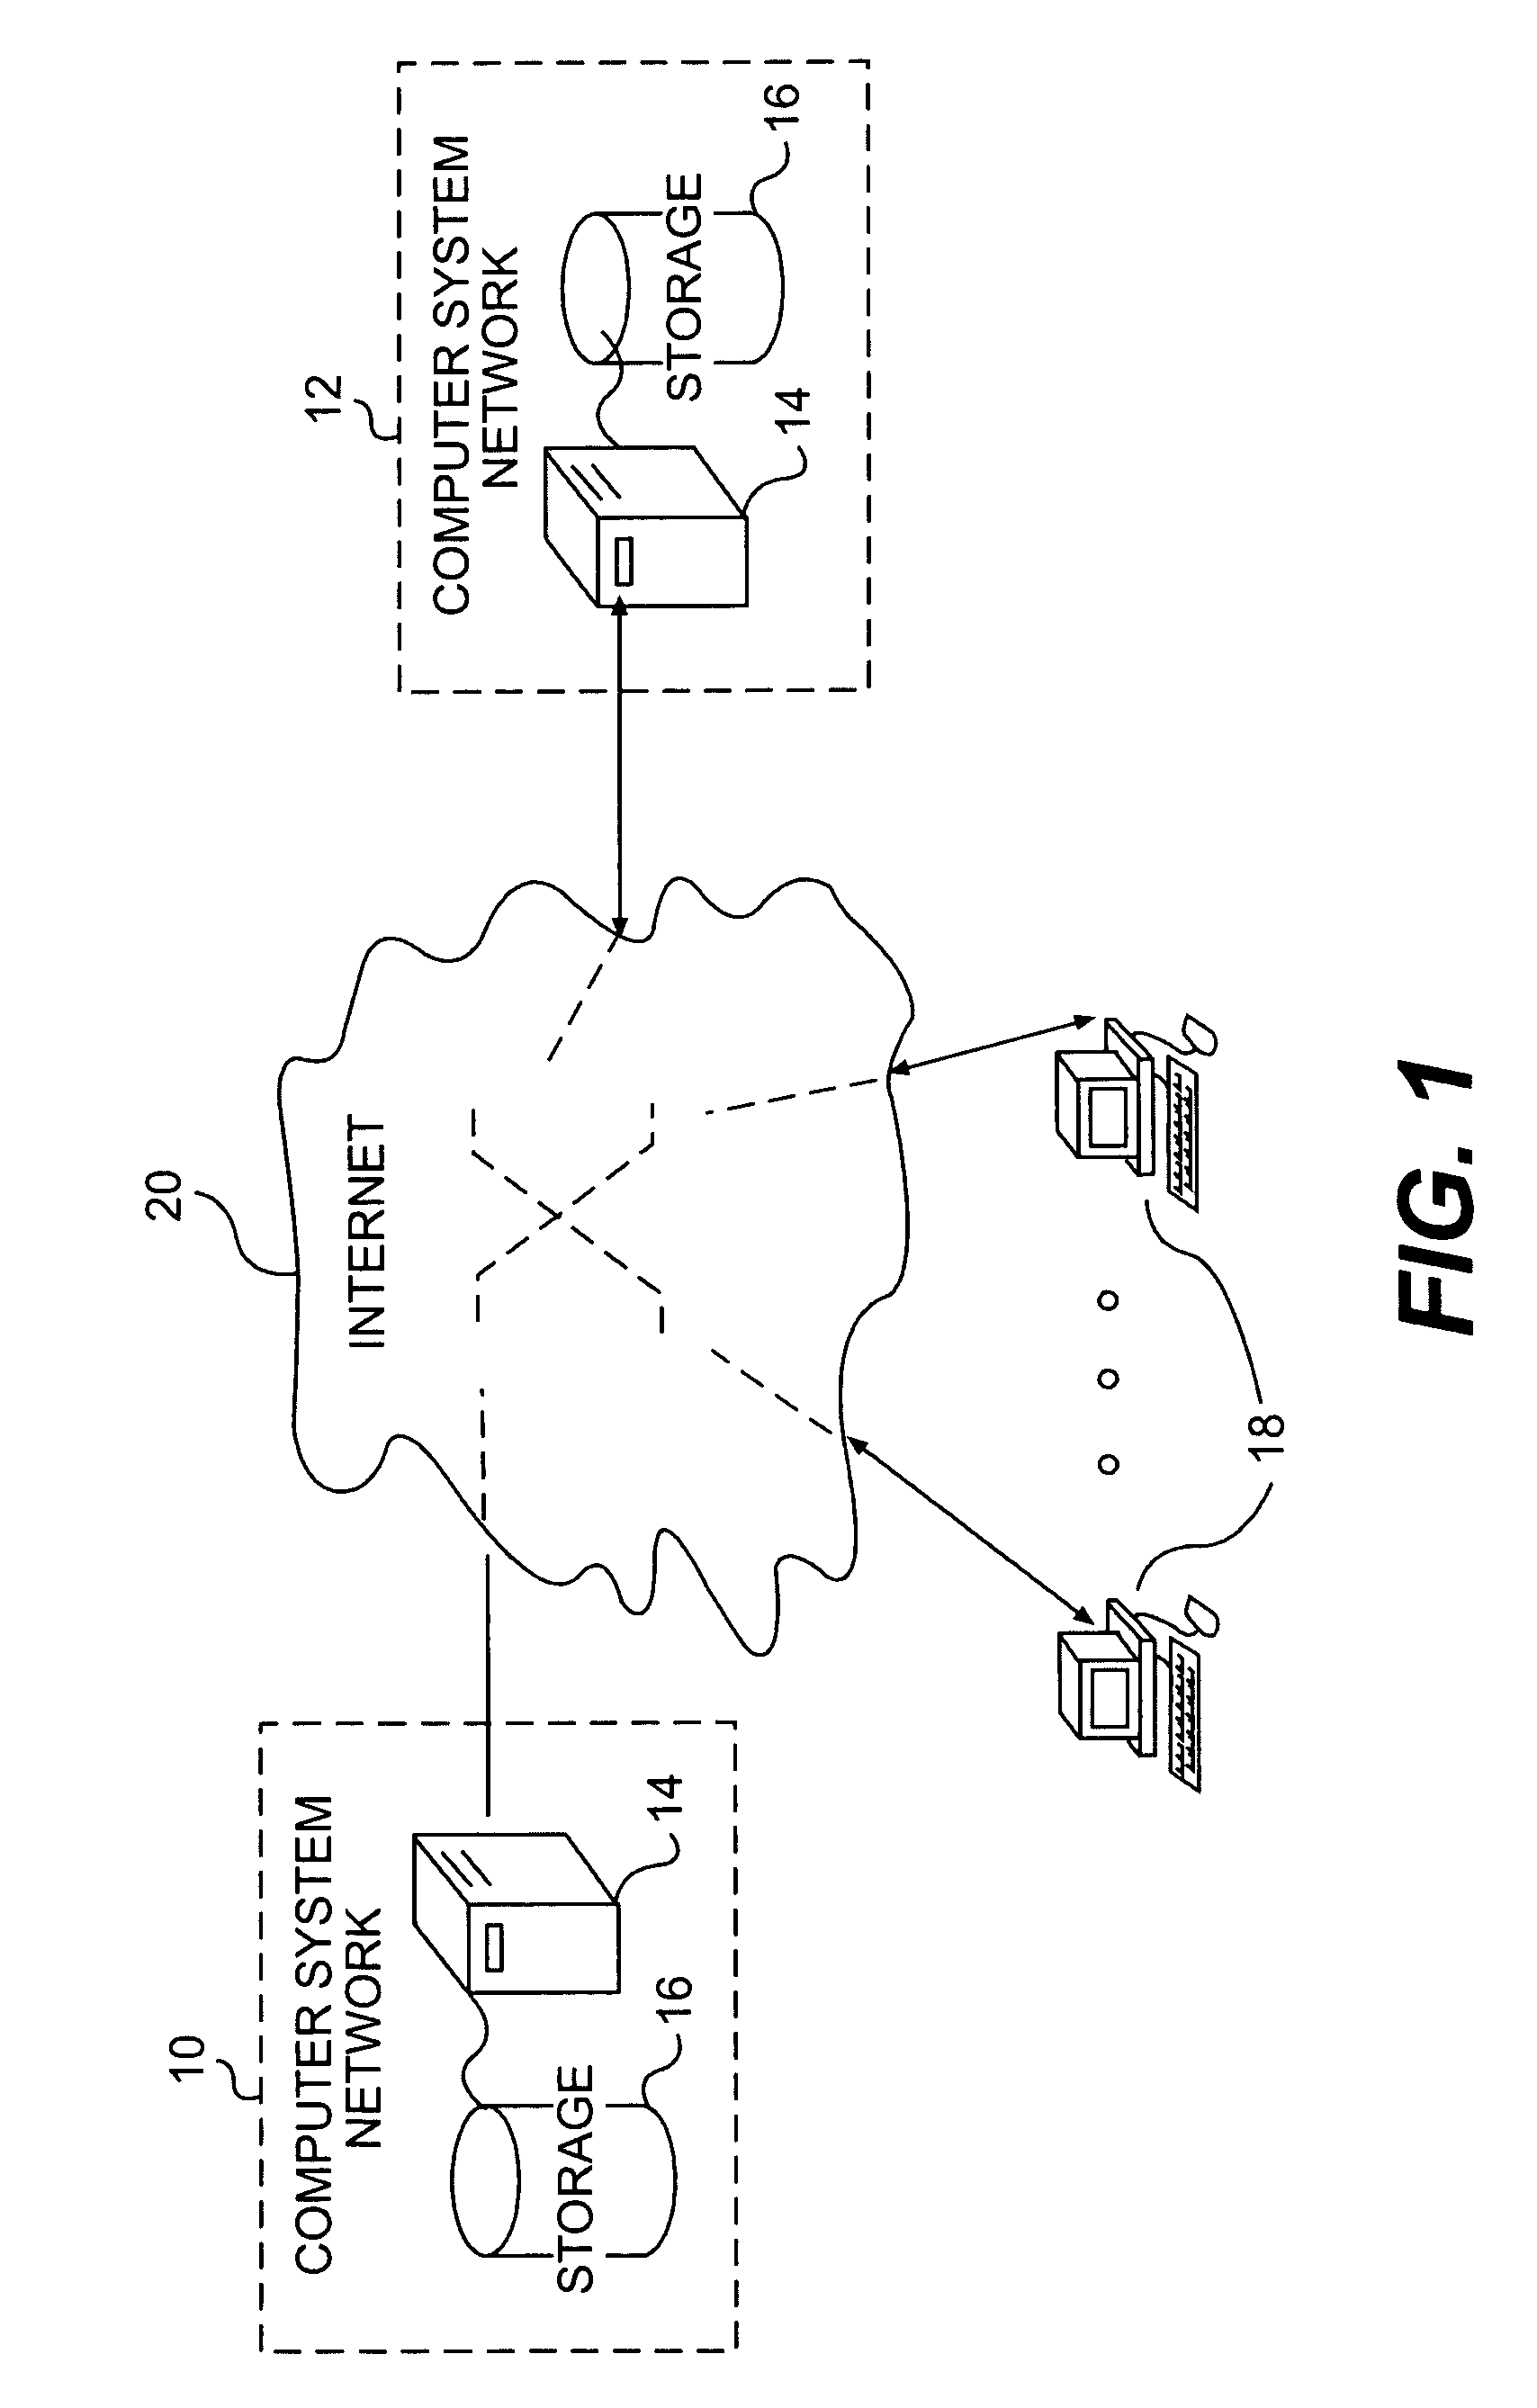 Method and system for object-level web performance and analysis